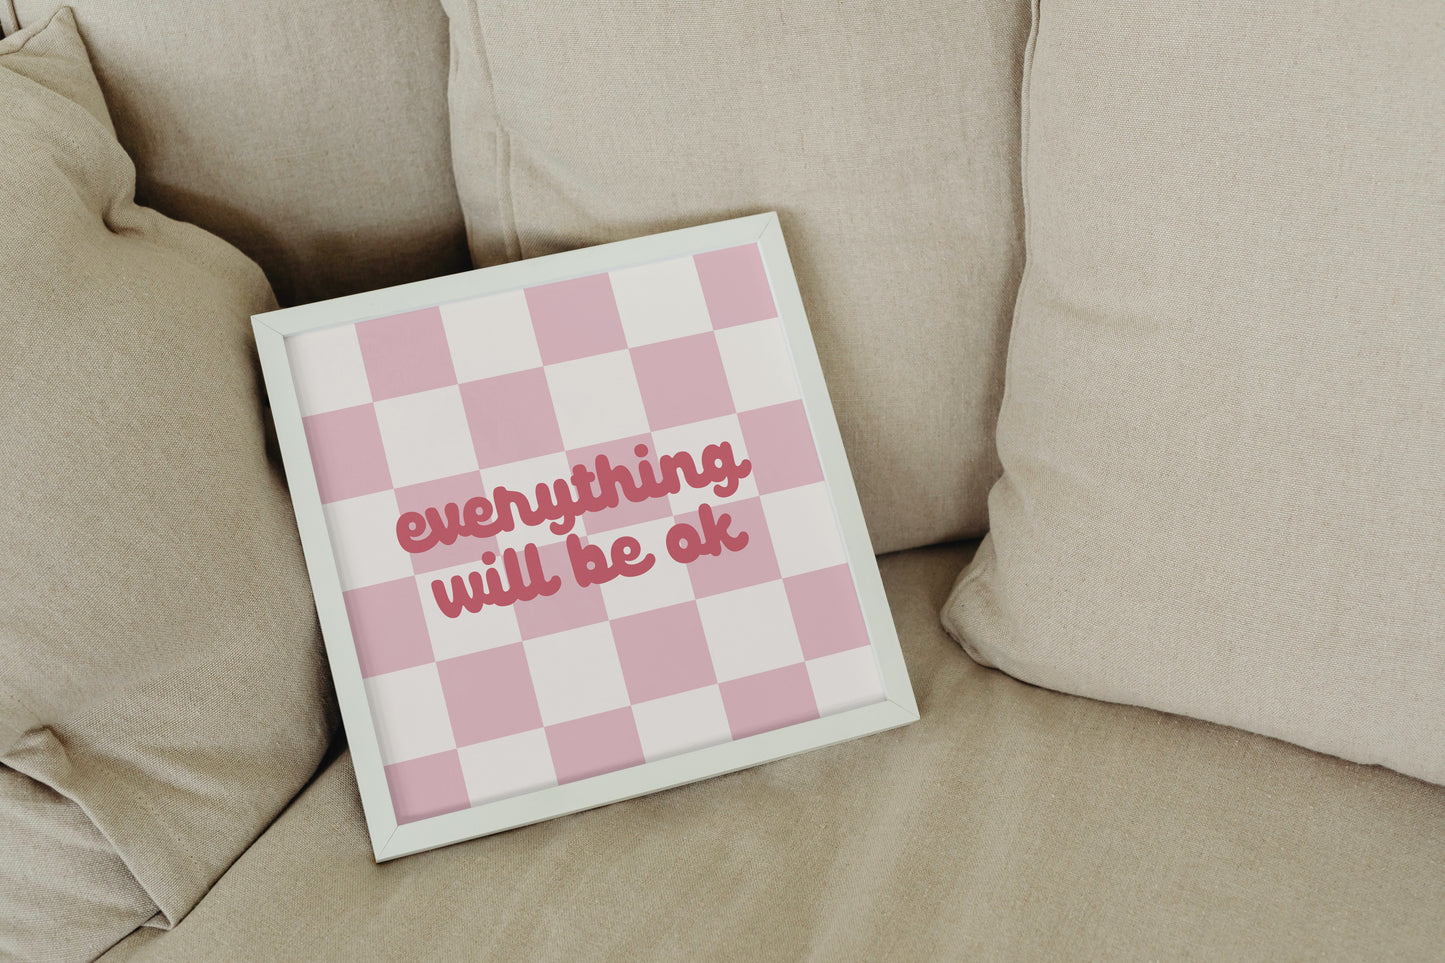 Everything will be ok, cute aesthetic, pink print poster - cuddles in the kitchen 